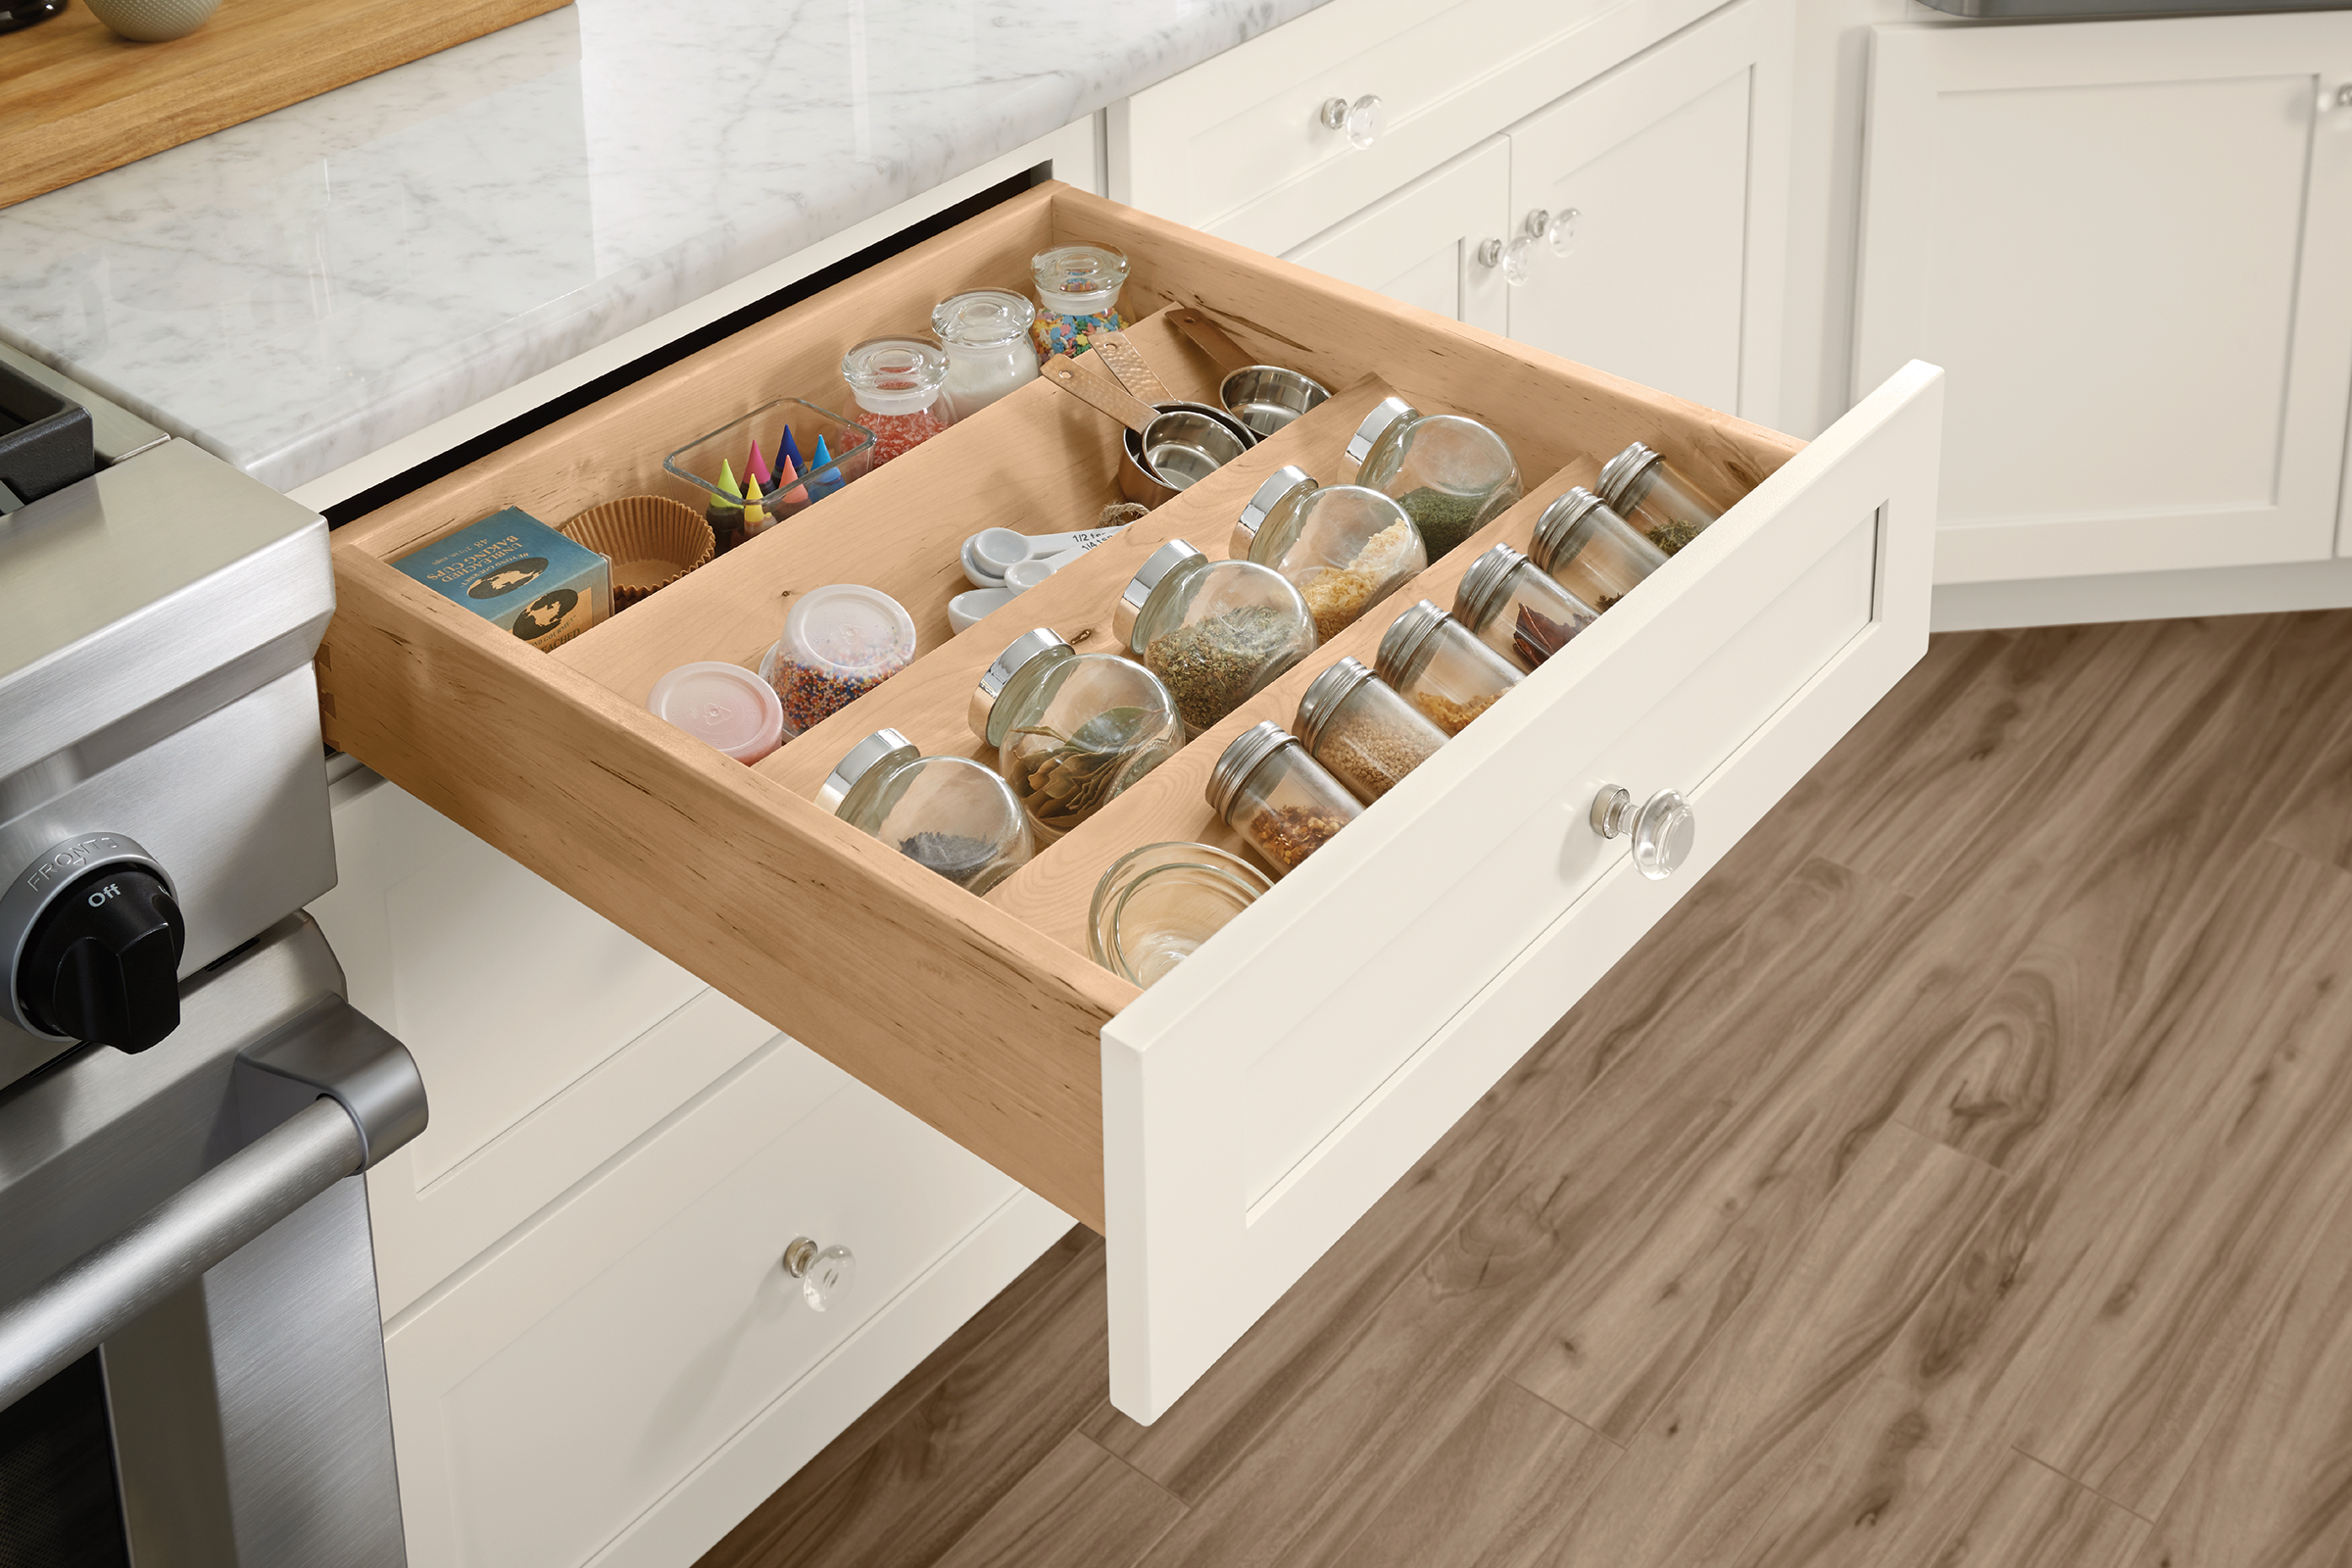 Utensil Crock Ideas: For Convenience & Saving Drawer Space